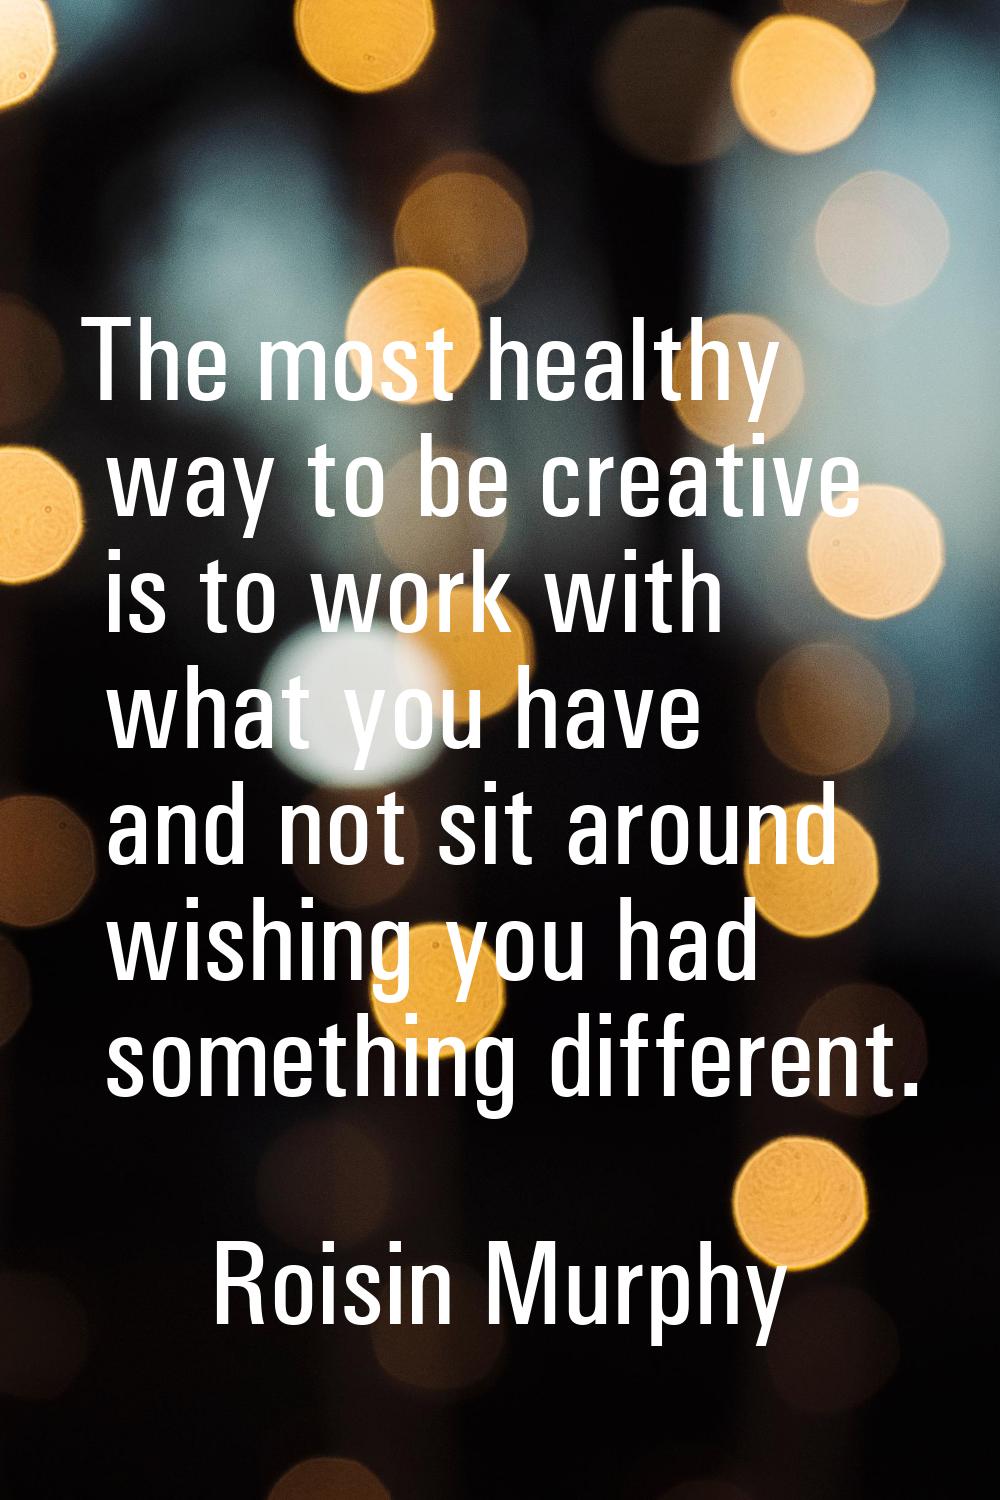 The most healthy way to be creative is to work with what you have and not sit around wishing you ha